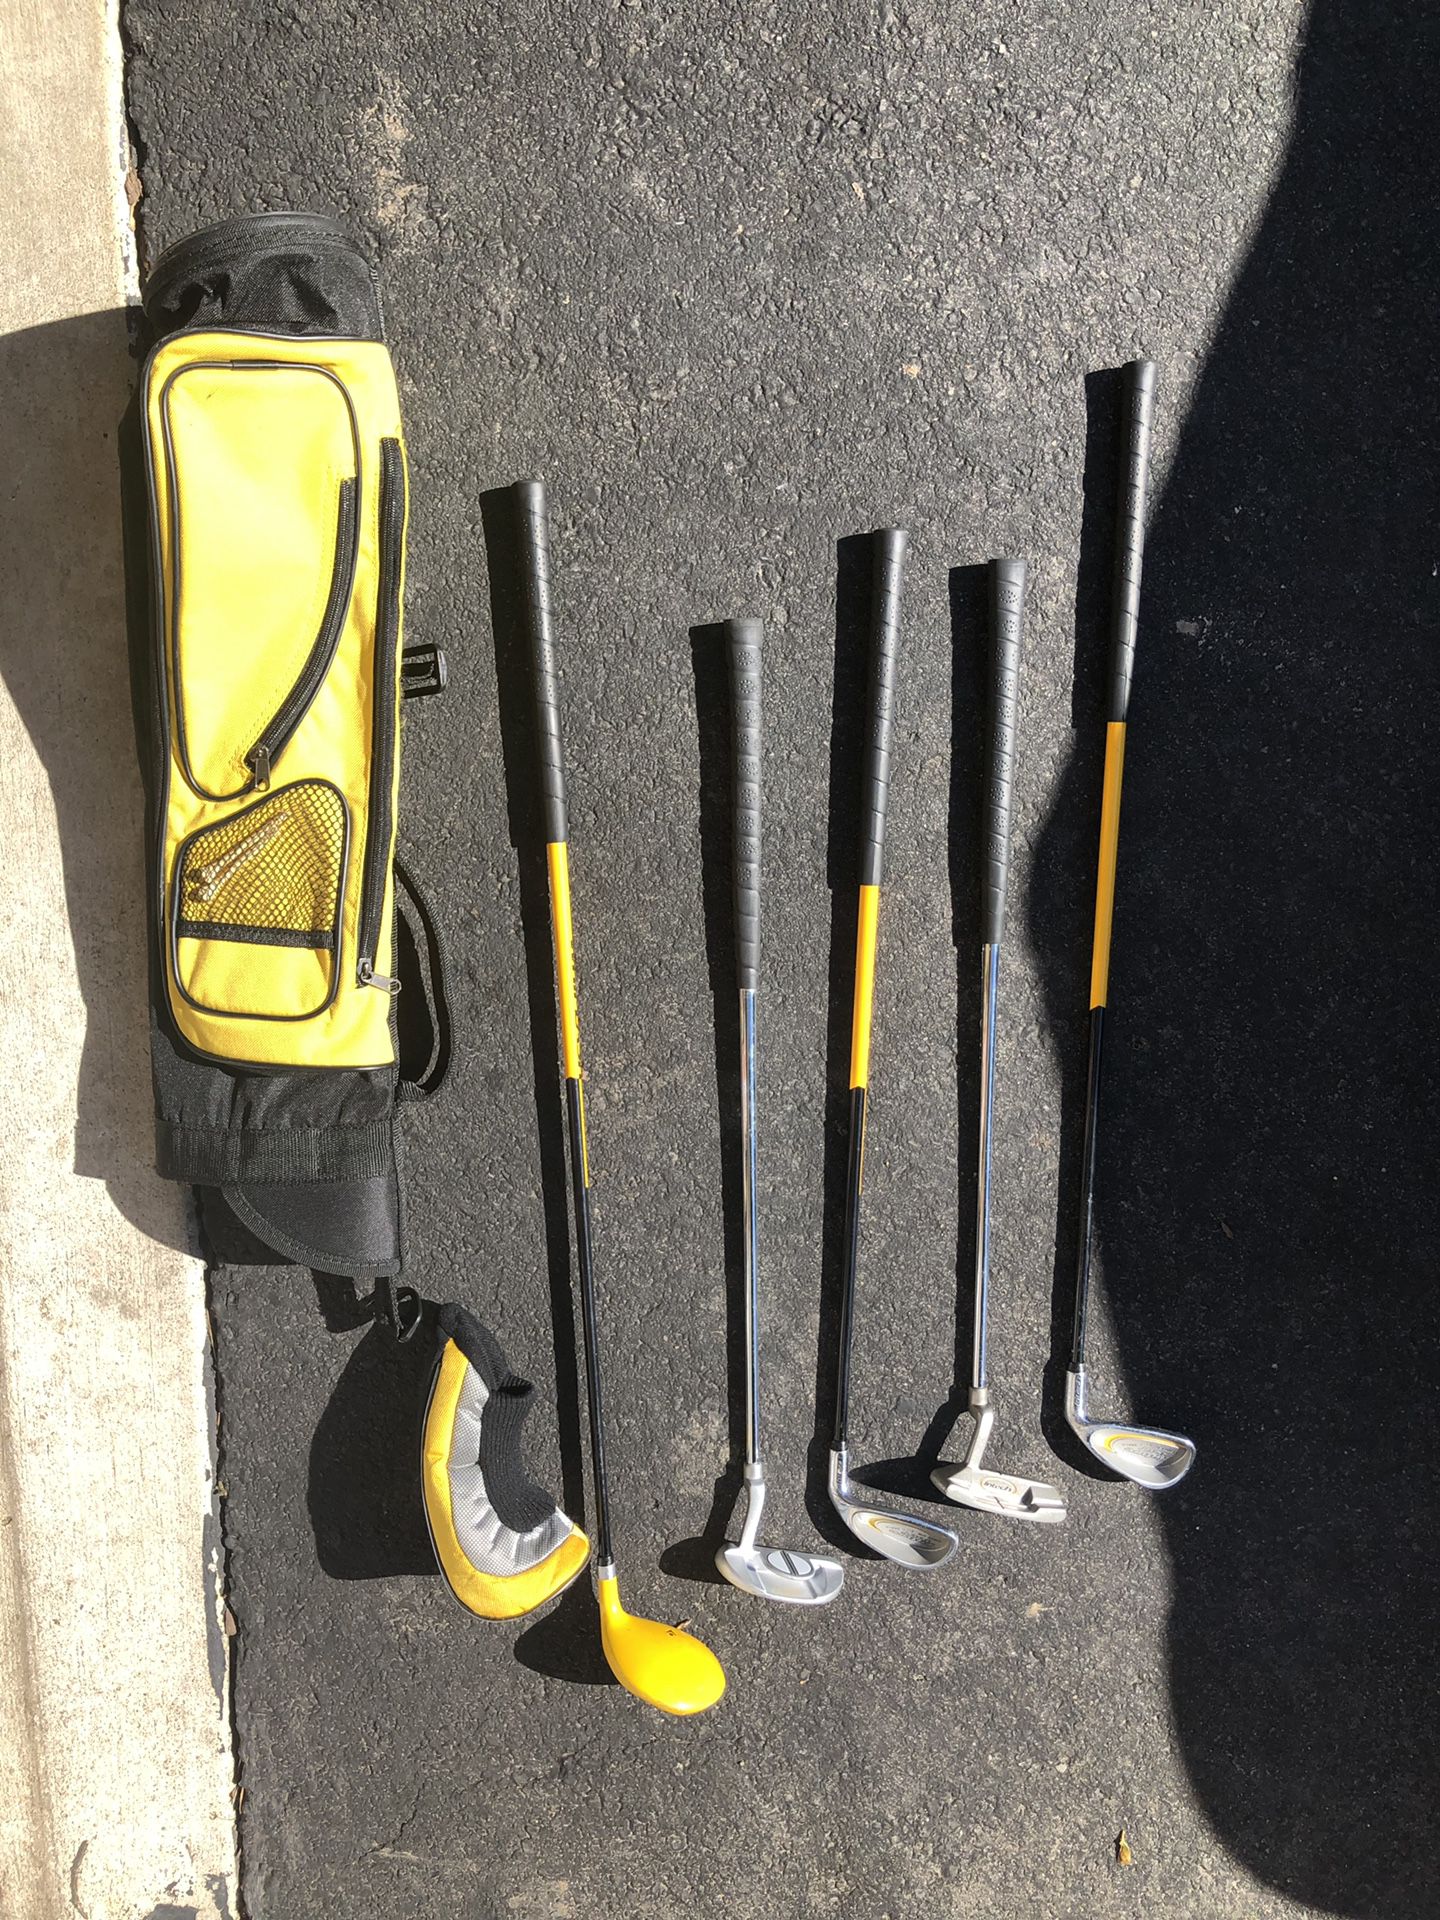 Kids size golf club set with carrying bag